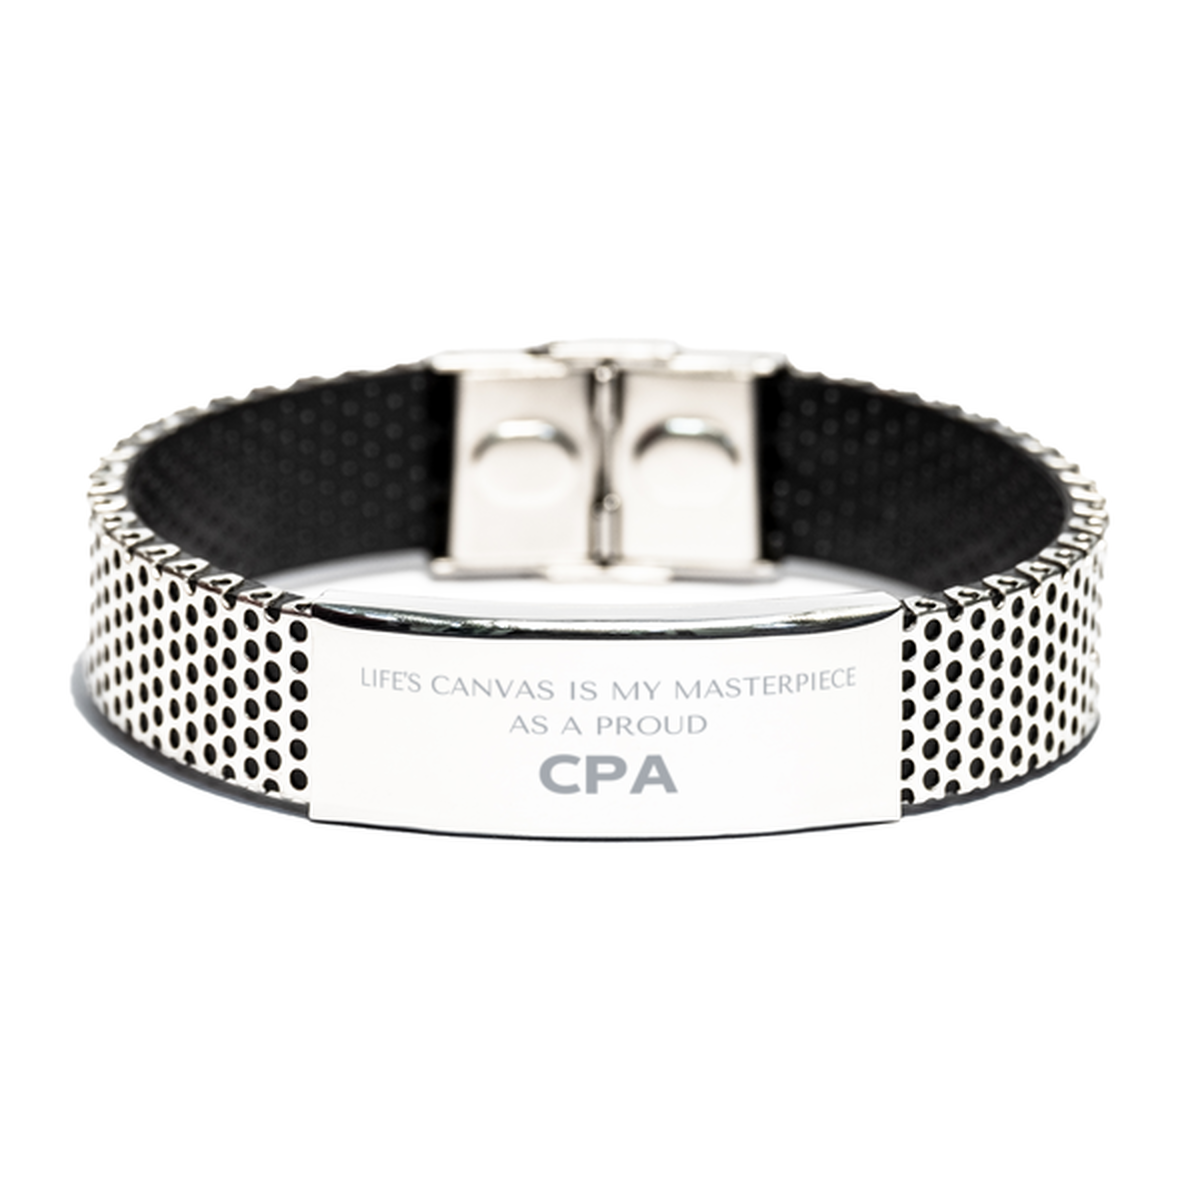 Proud CPA Gifts, Life's canvas is my masterpiece, Epic Birthday Christmas Unique Stainless Steel Bracelet For CPA, Coworkers, Men, Women, Friends